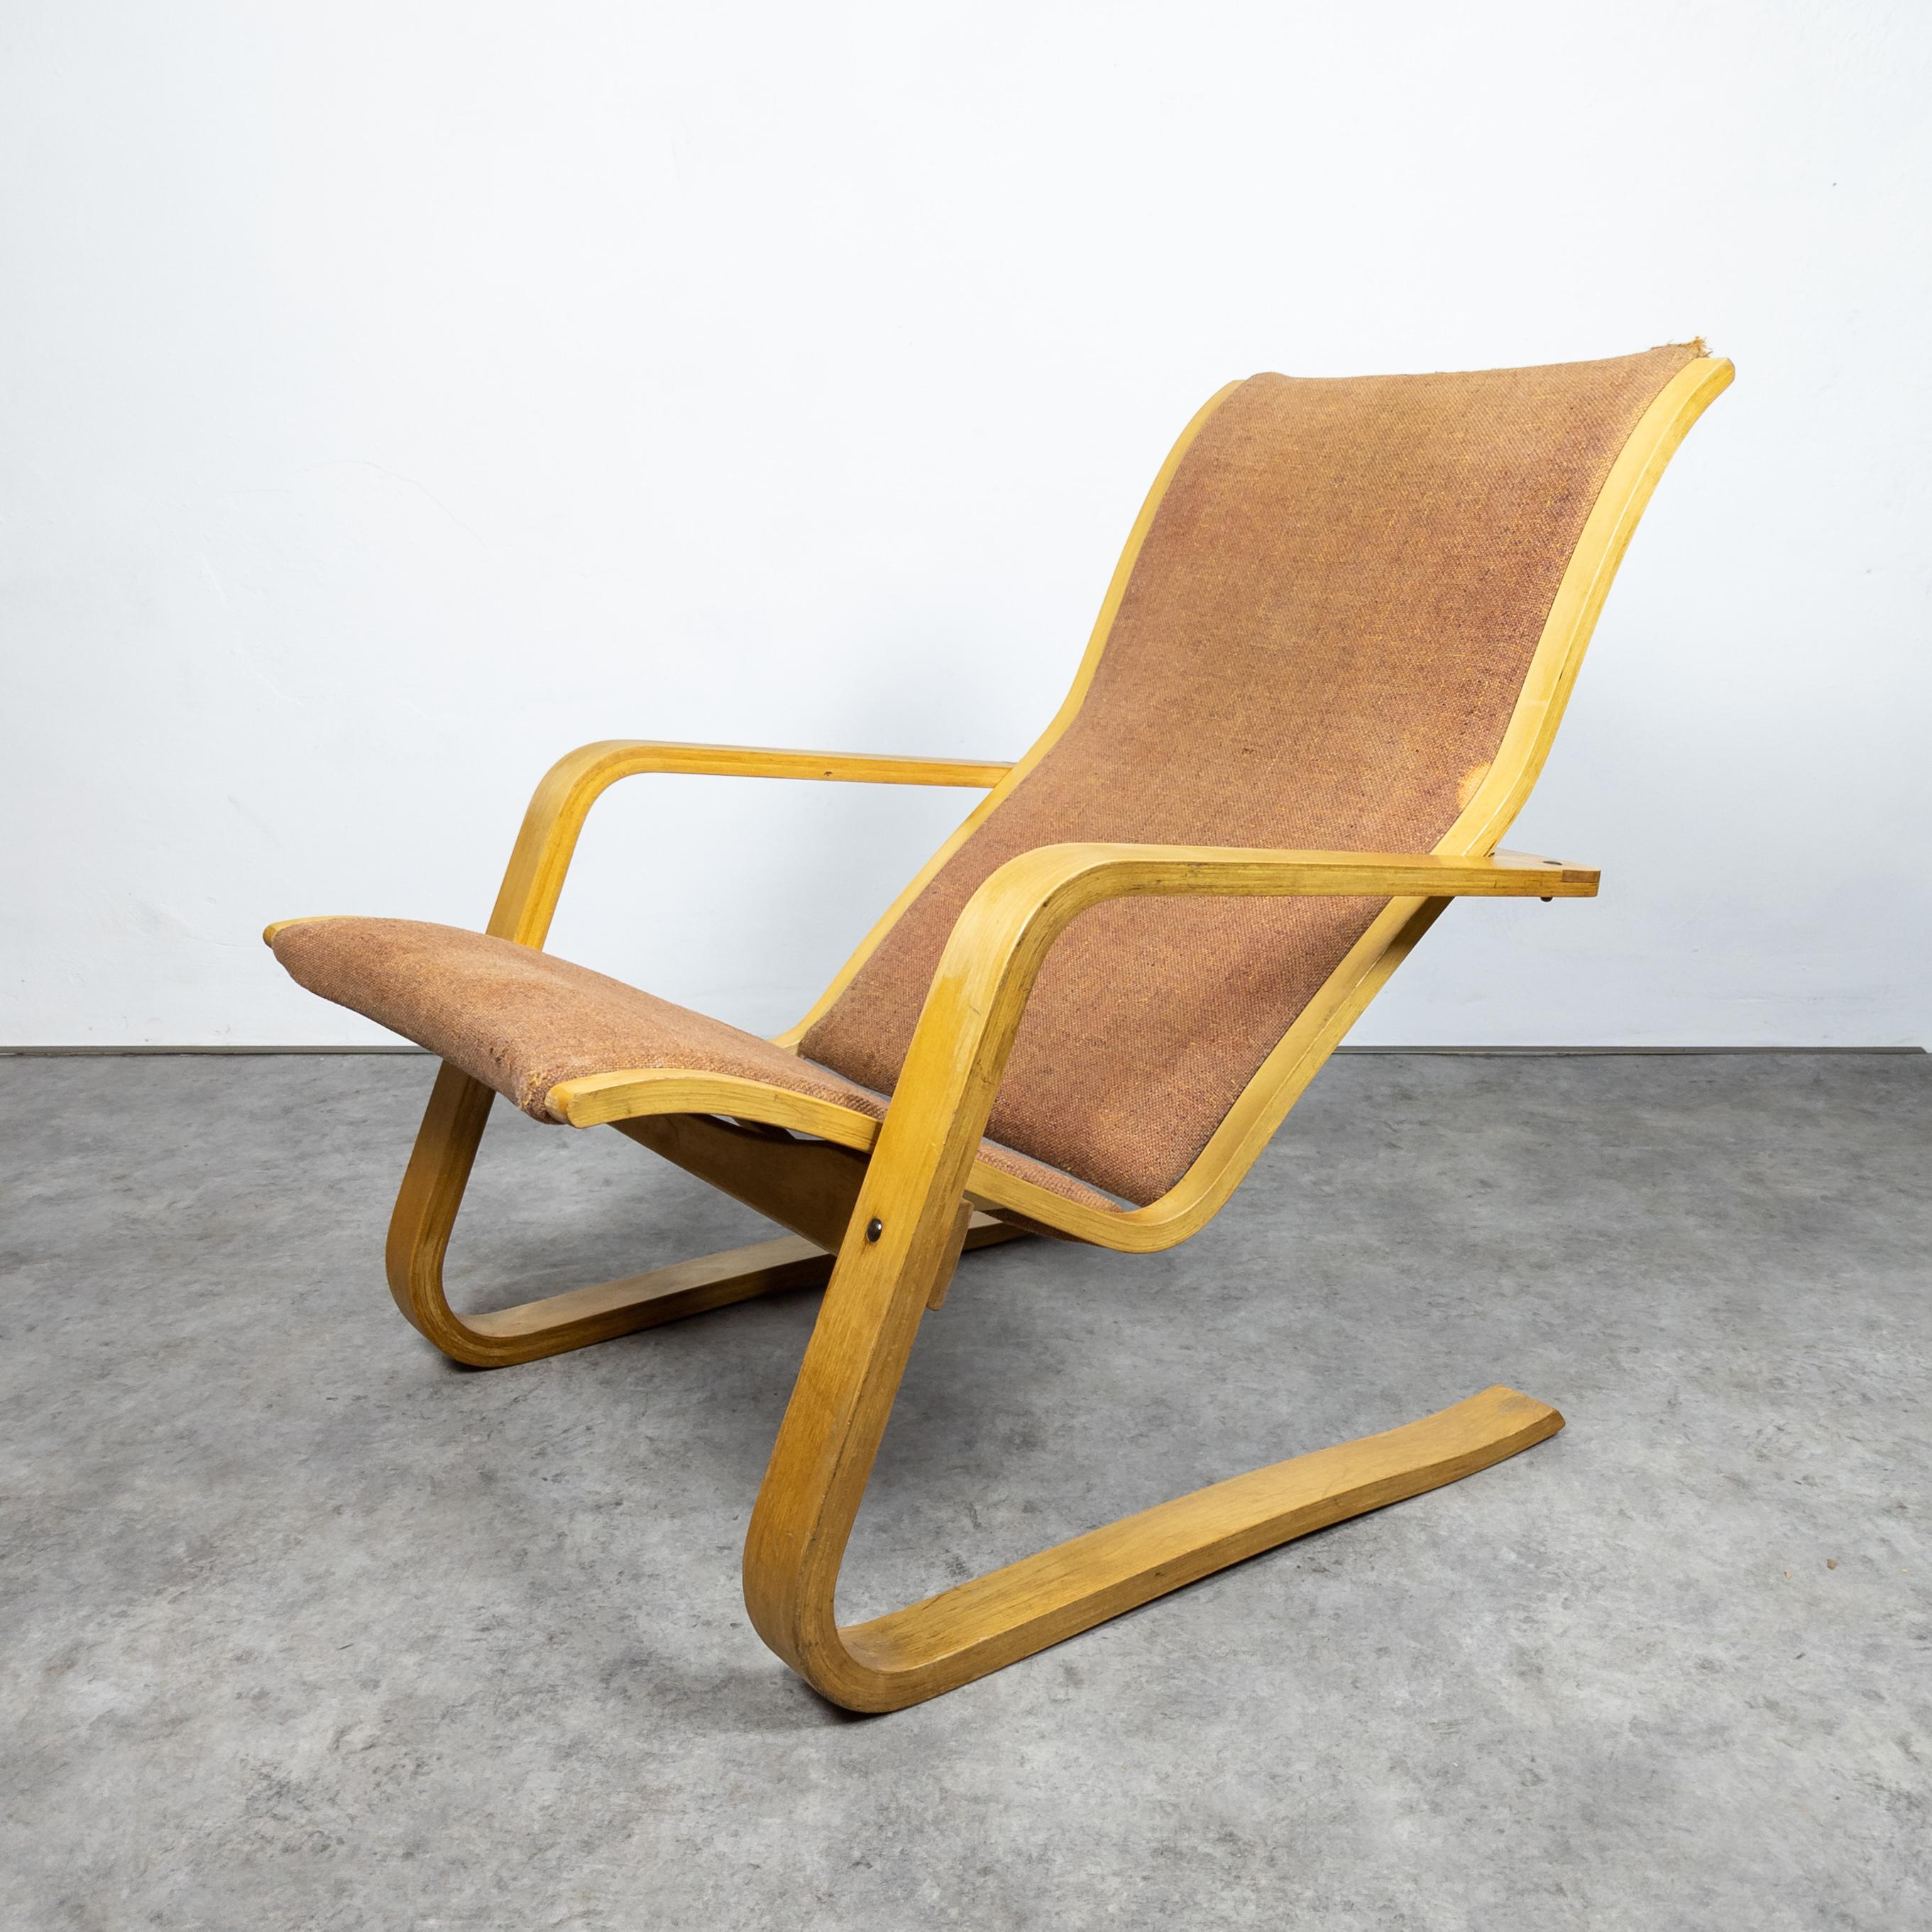 Rare and unique lounge chair made of bent laminated plywood. Manufactured in limited series of 1 000 pcs by Drevopodnik Holešov, former Czechoslovakia in 1950s. Designed by company trio of famous Czech architects Jan Šrámek, Zbynek Hrivnác and Jan